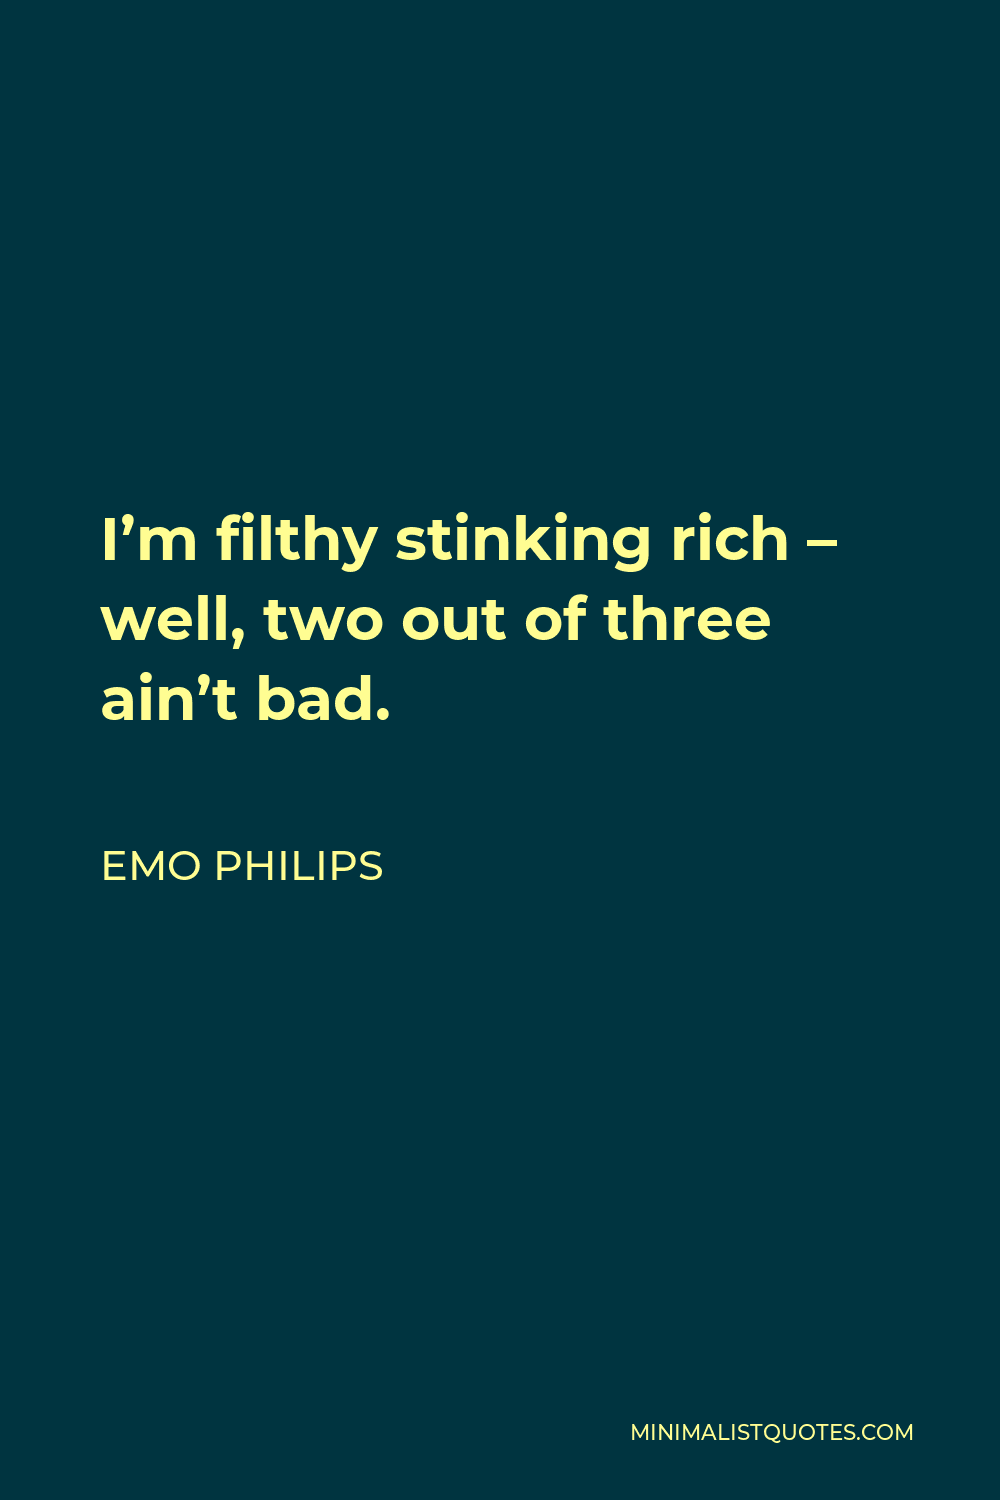 Emo Philips Quote - I’m filthy stinking rich – well, two out of three ain’t bad.